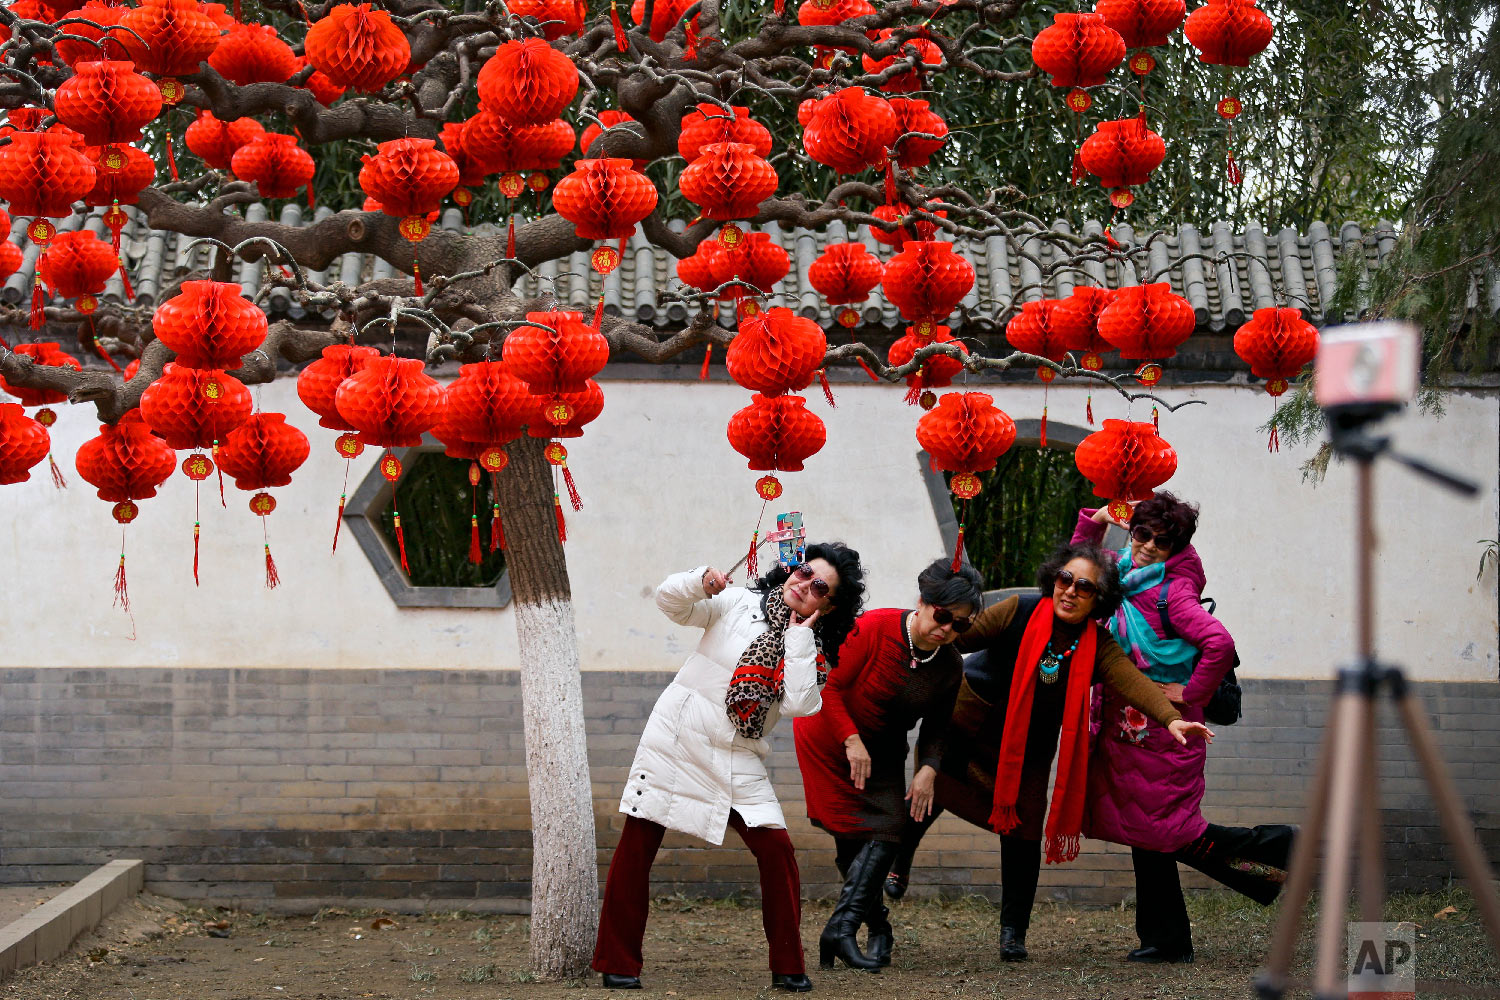  Women take a selfie near a tree decorated with red lanterns ahead of the Lunar New Year at Ditan Park in Beijing, Wednesday, Jan. 30, 2019. (AP Photo/Andy Wong) 